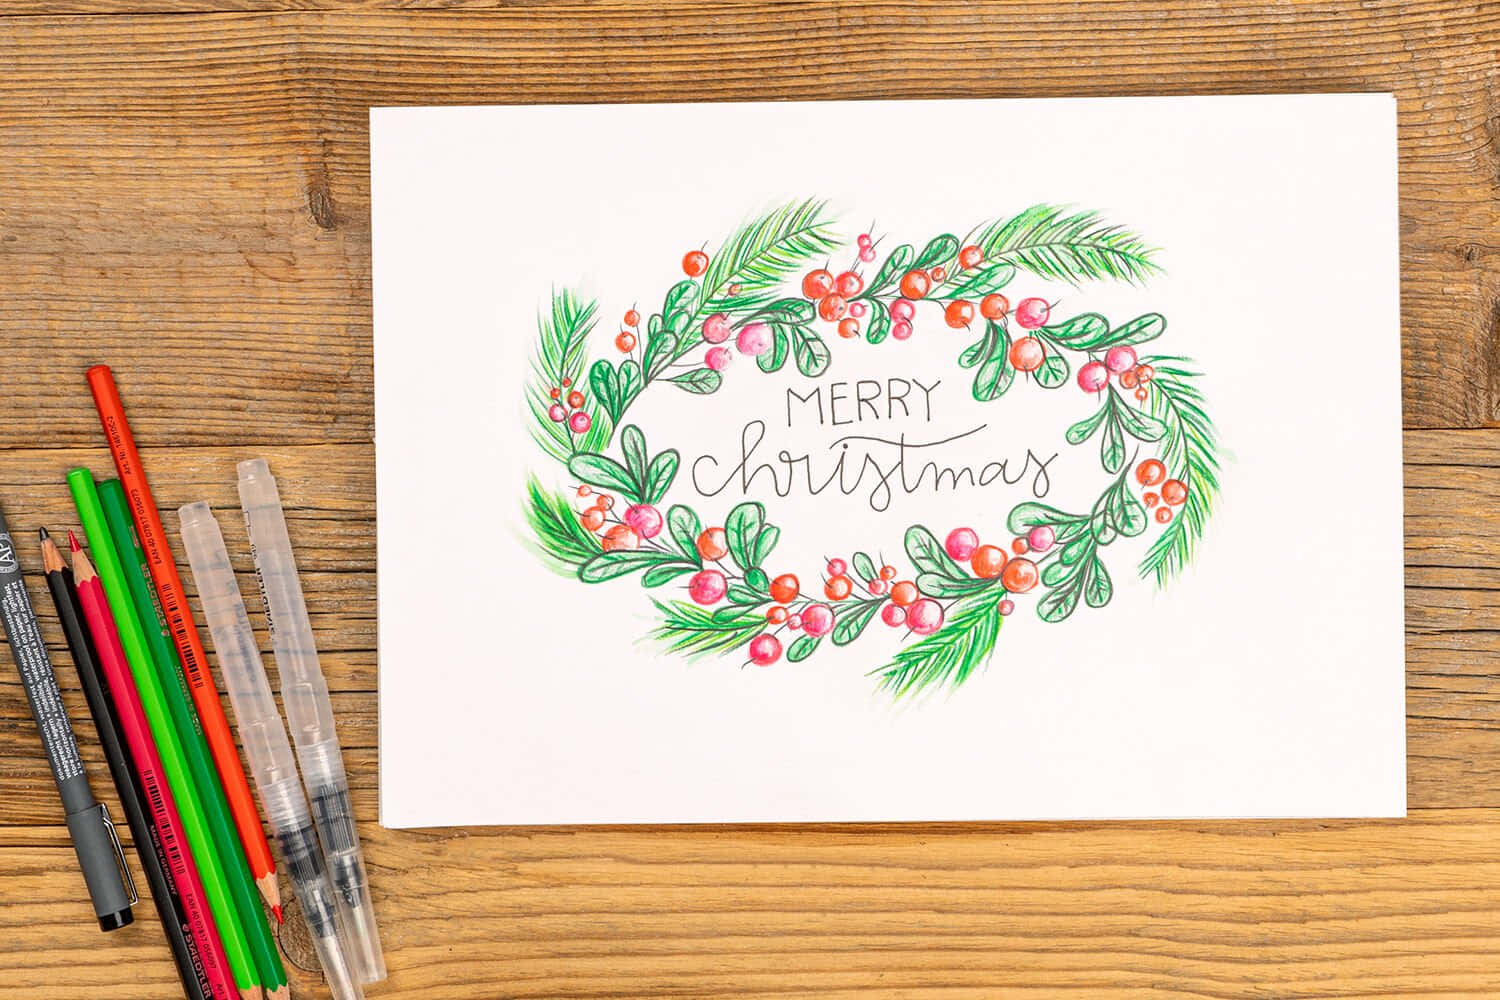 A Christmas Card With A Wreath Of Holly And Berries